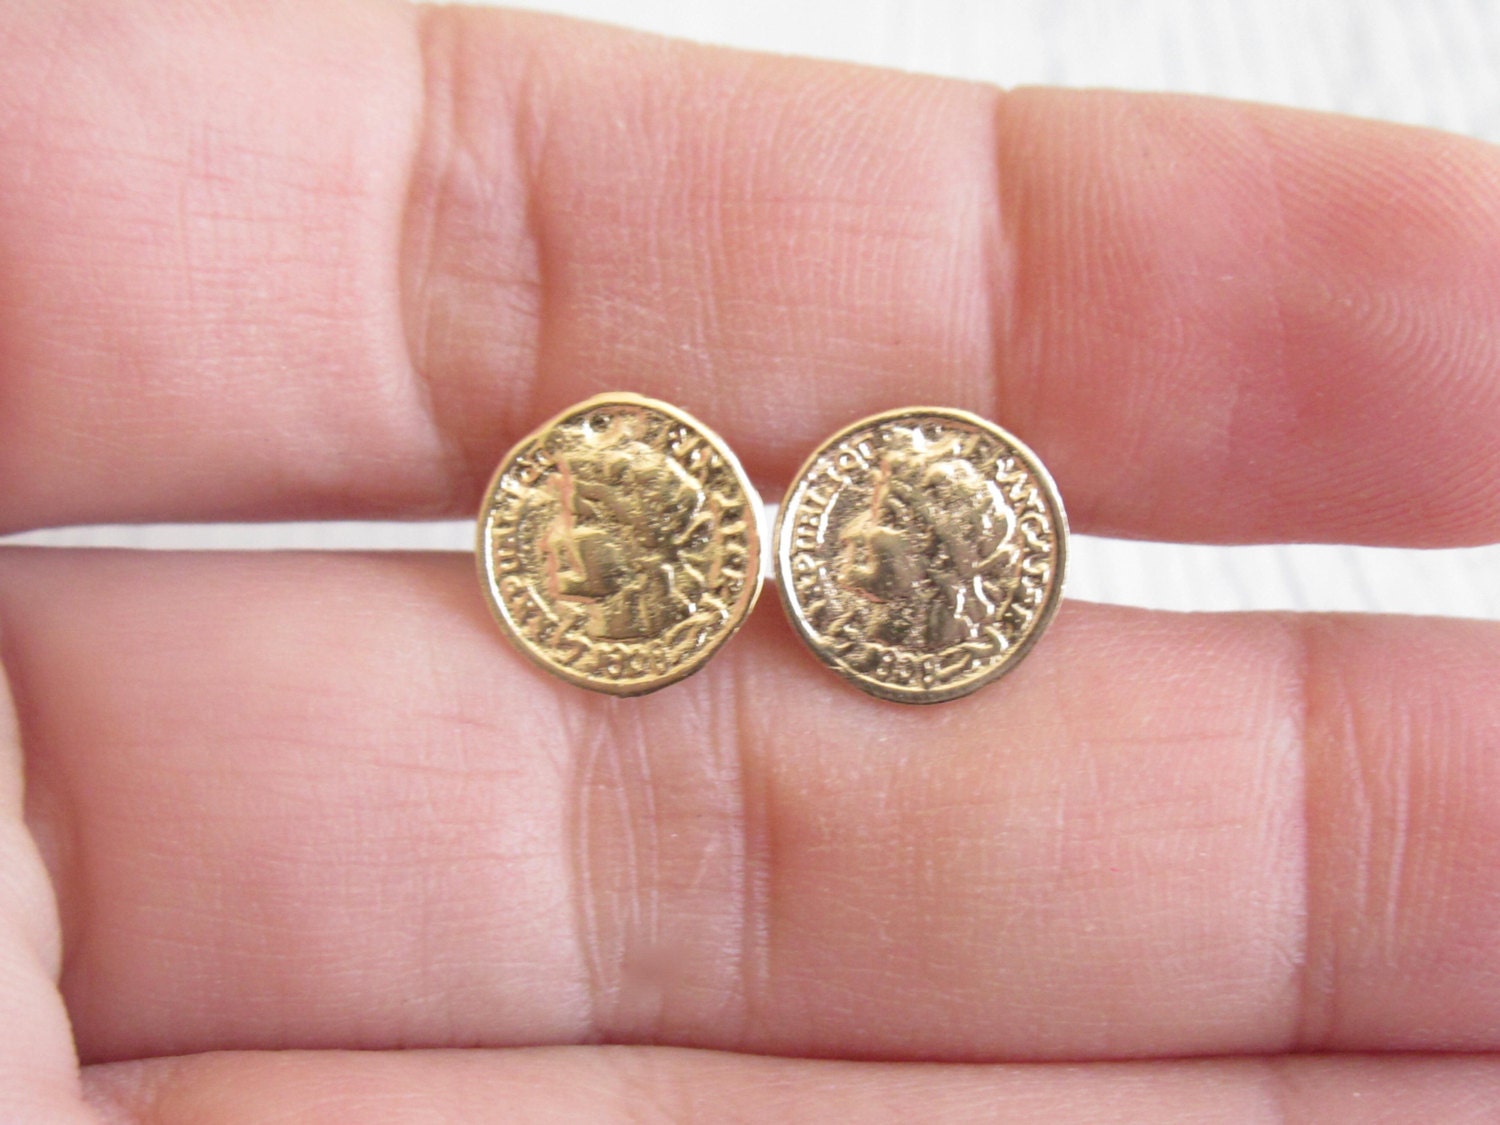 Gold Studs Gold Coin Earrings Gold Earrings Tiny by baronykajd